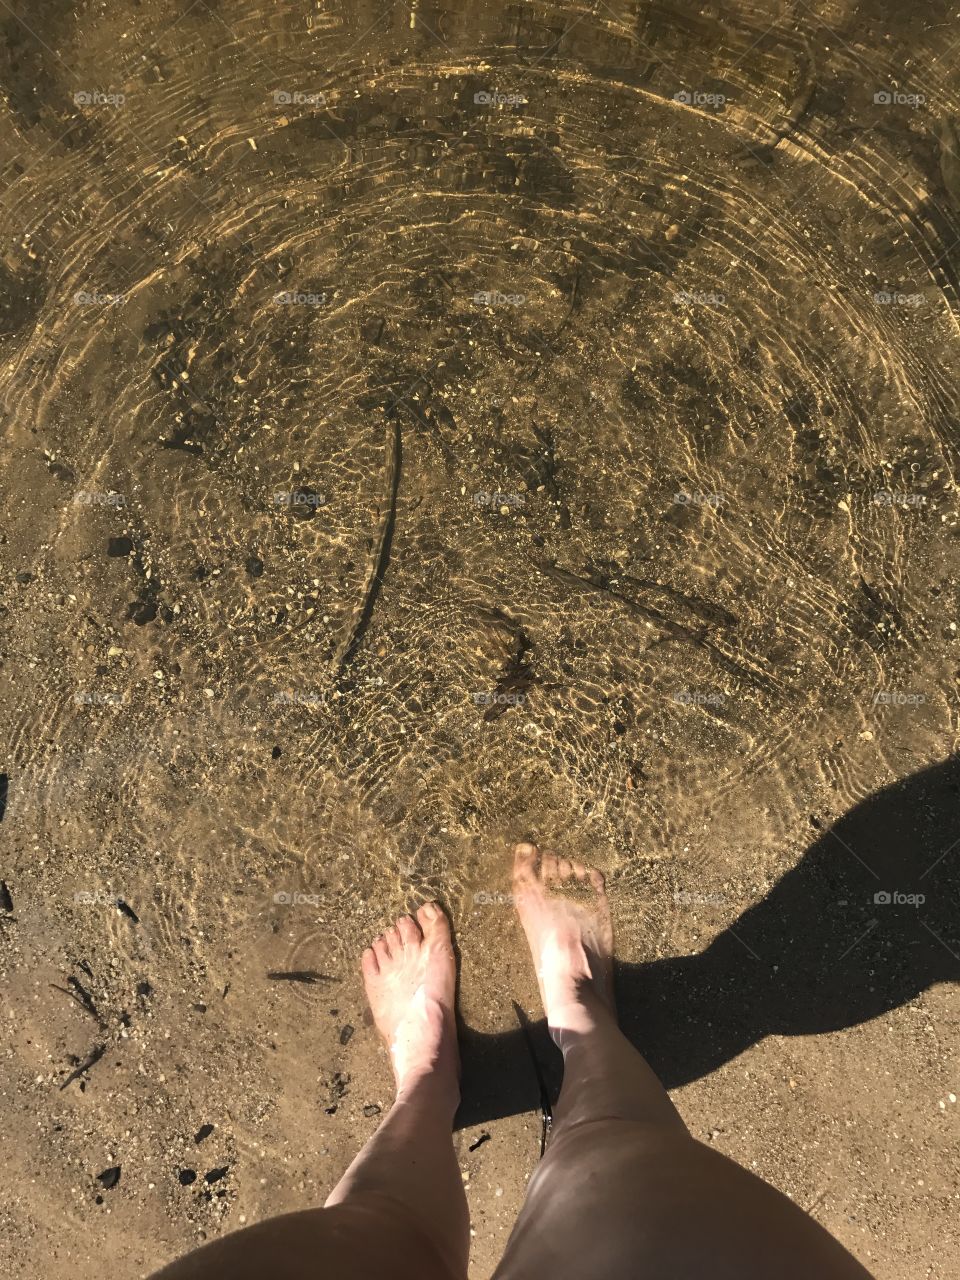 Put your feet in the water